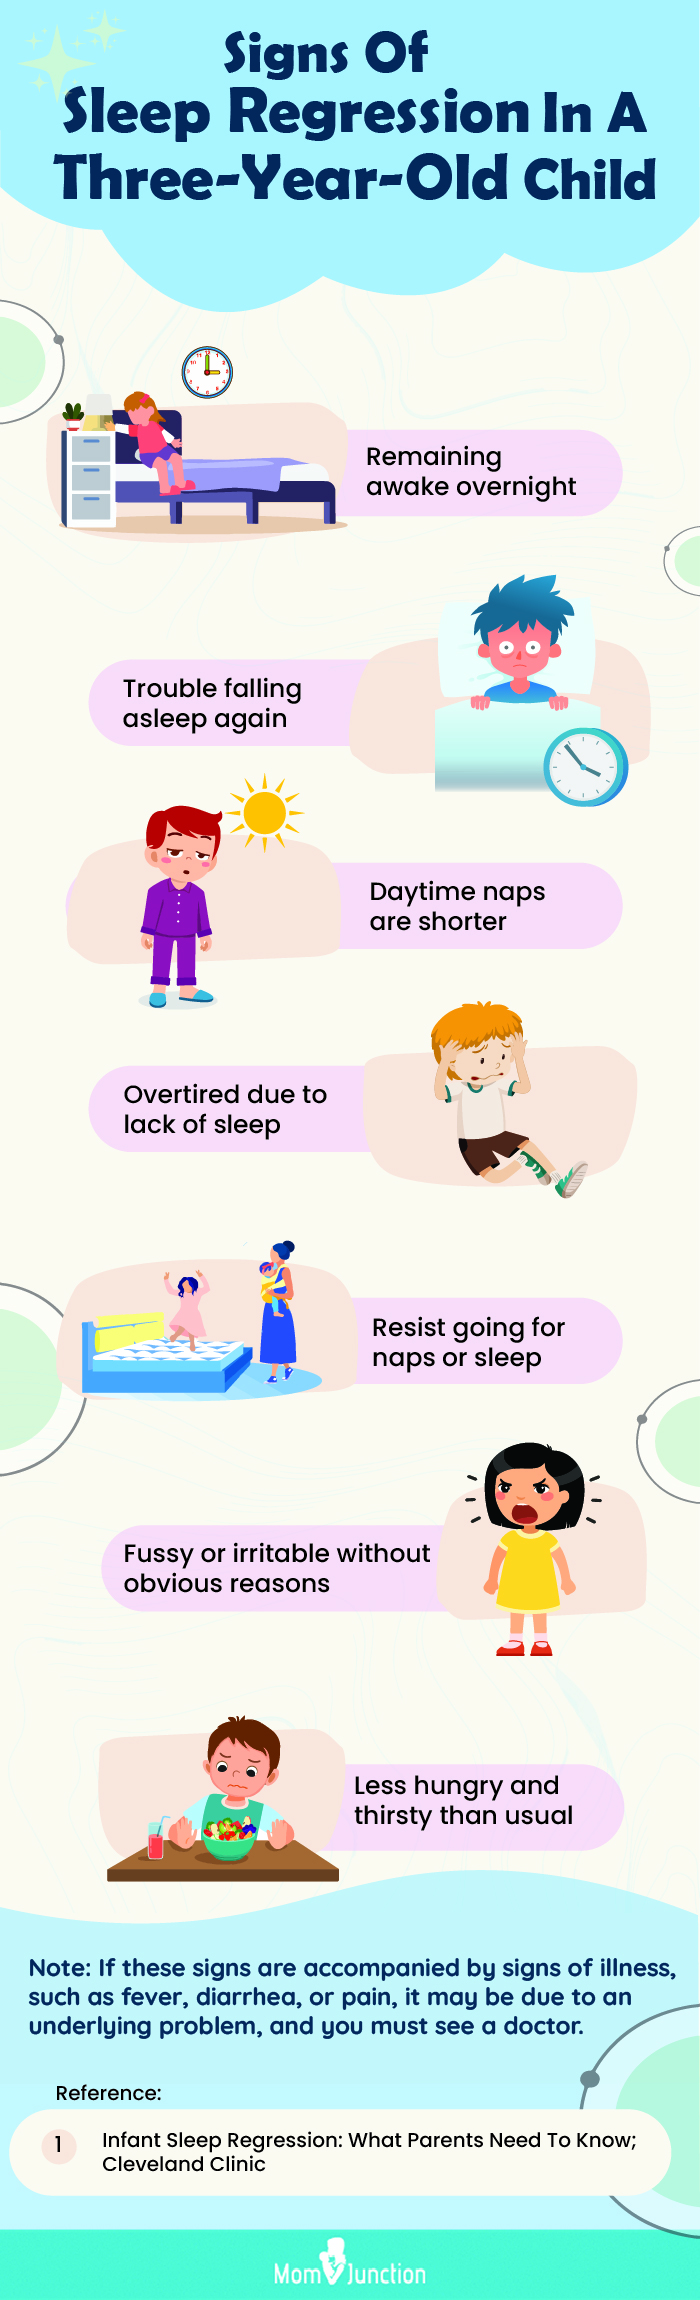 signs of sleep regression in a three year old child [infographic]